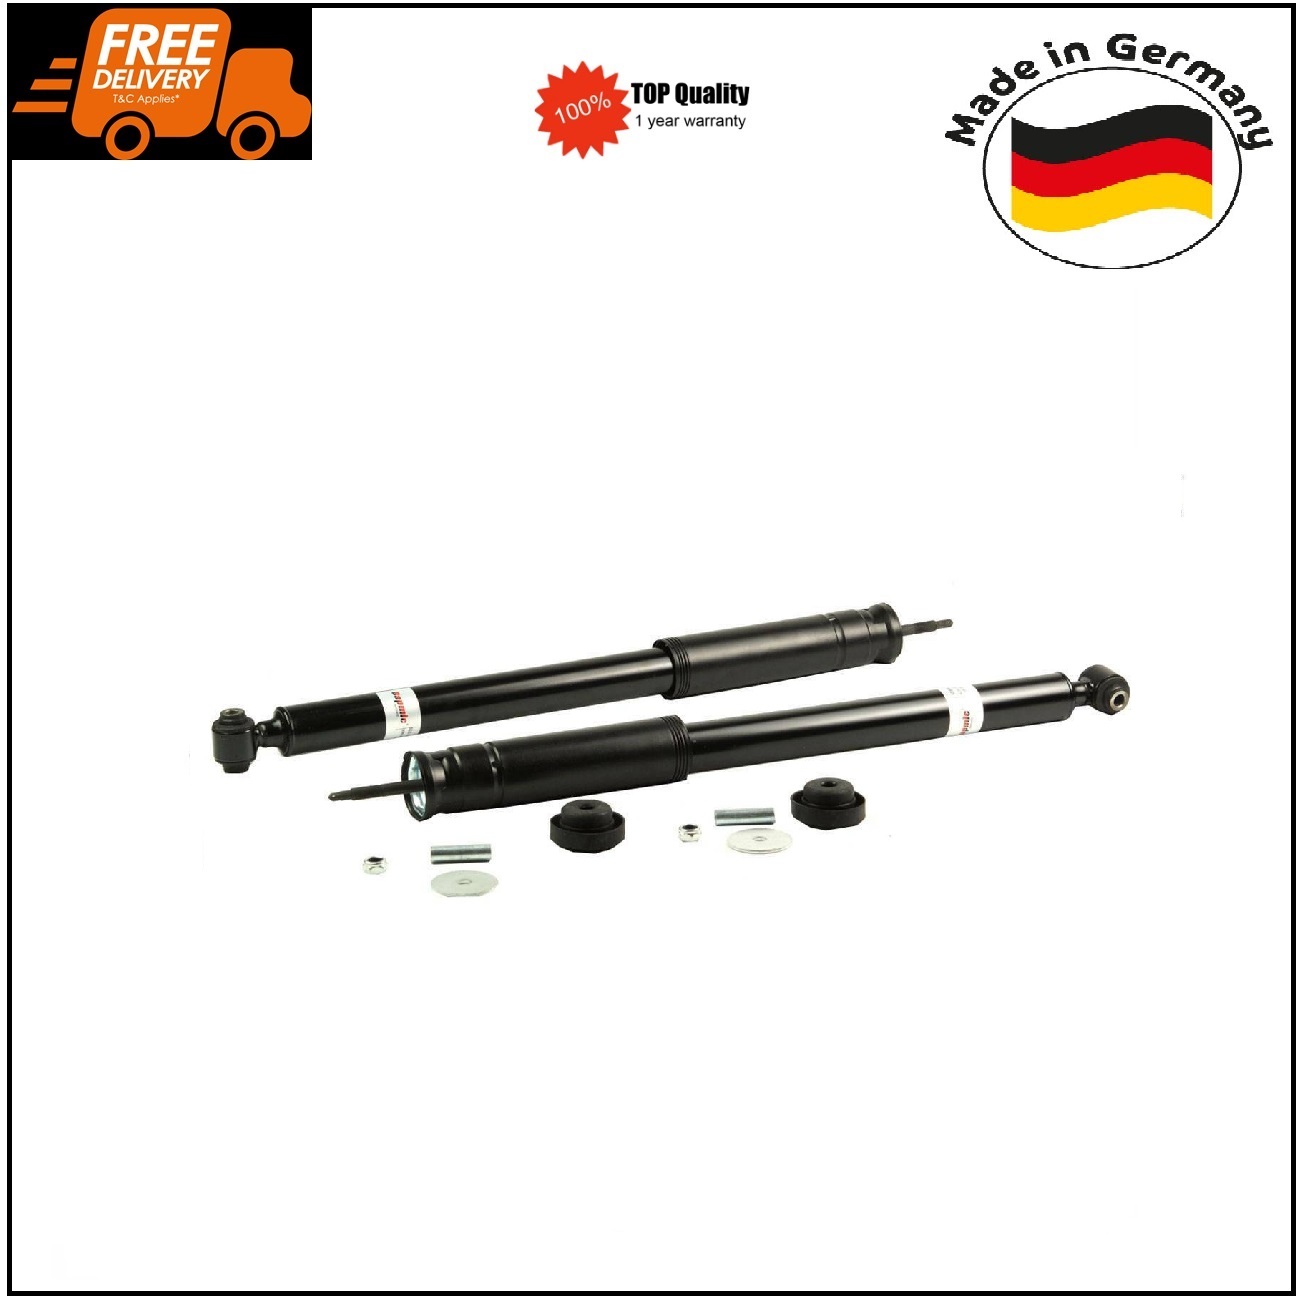 2Pcs Rear Shock Absorbers for Mercedes C219 W211 CLS350 CLS500 S55 S65 German Made